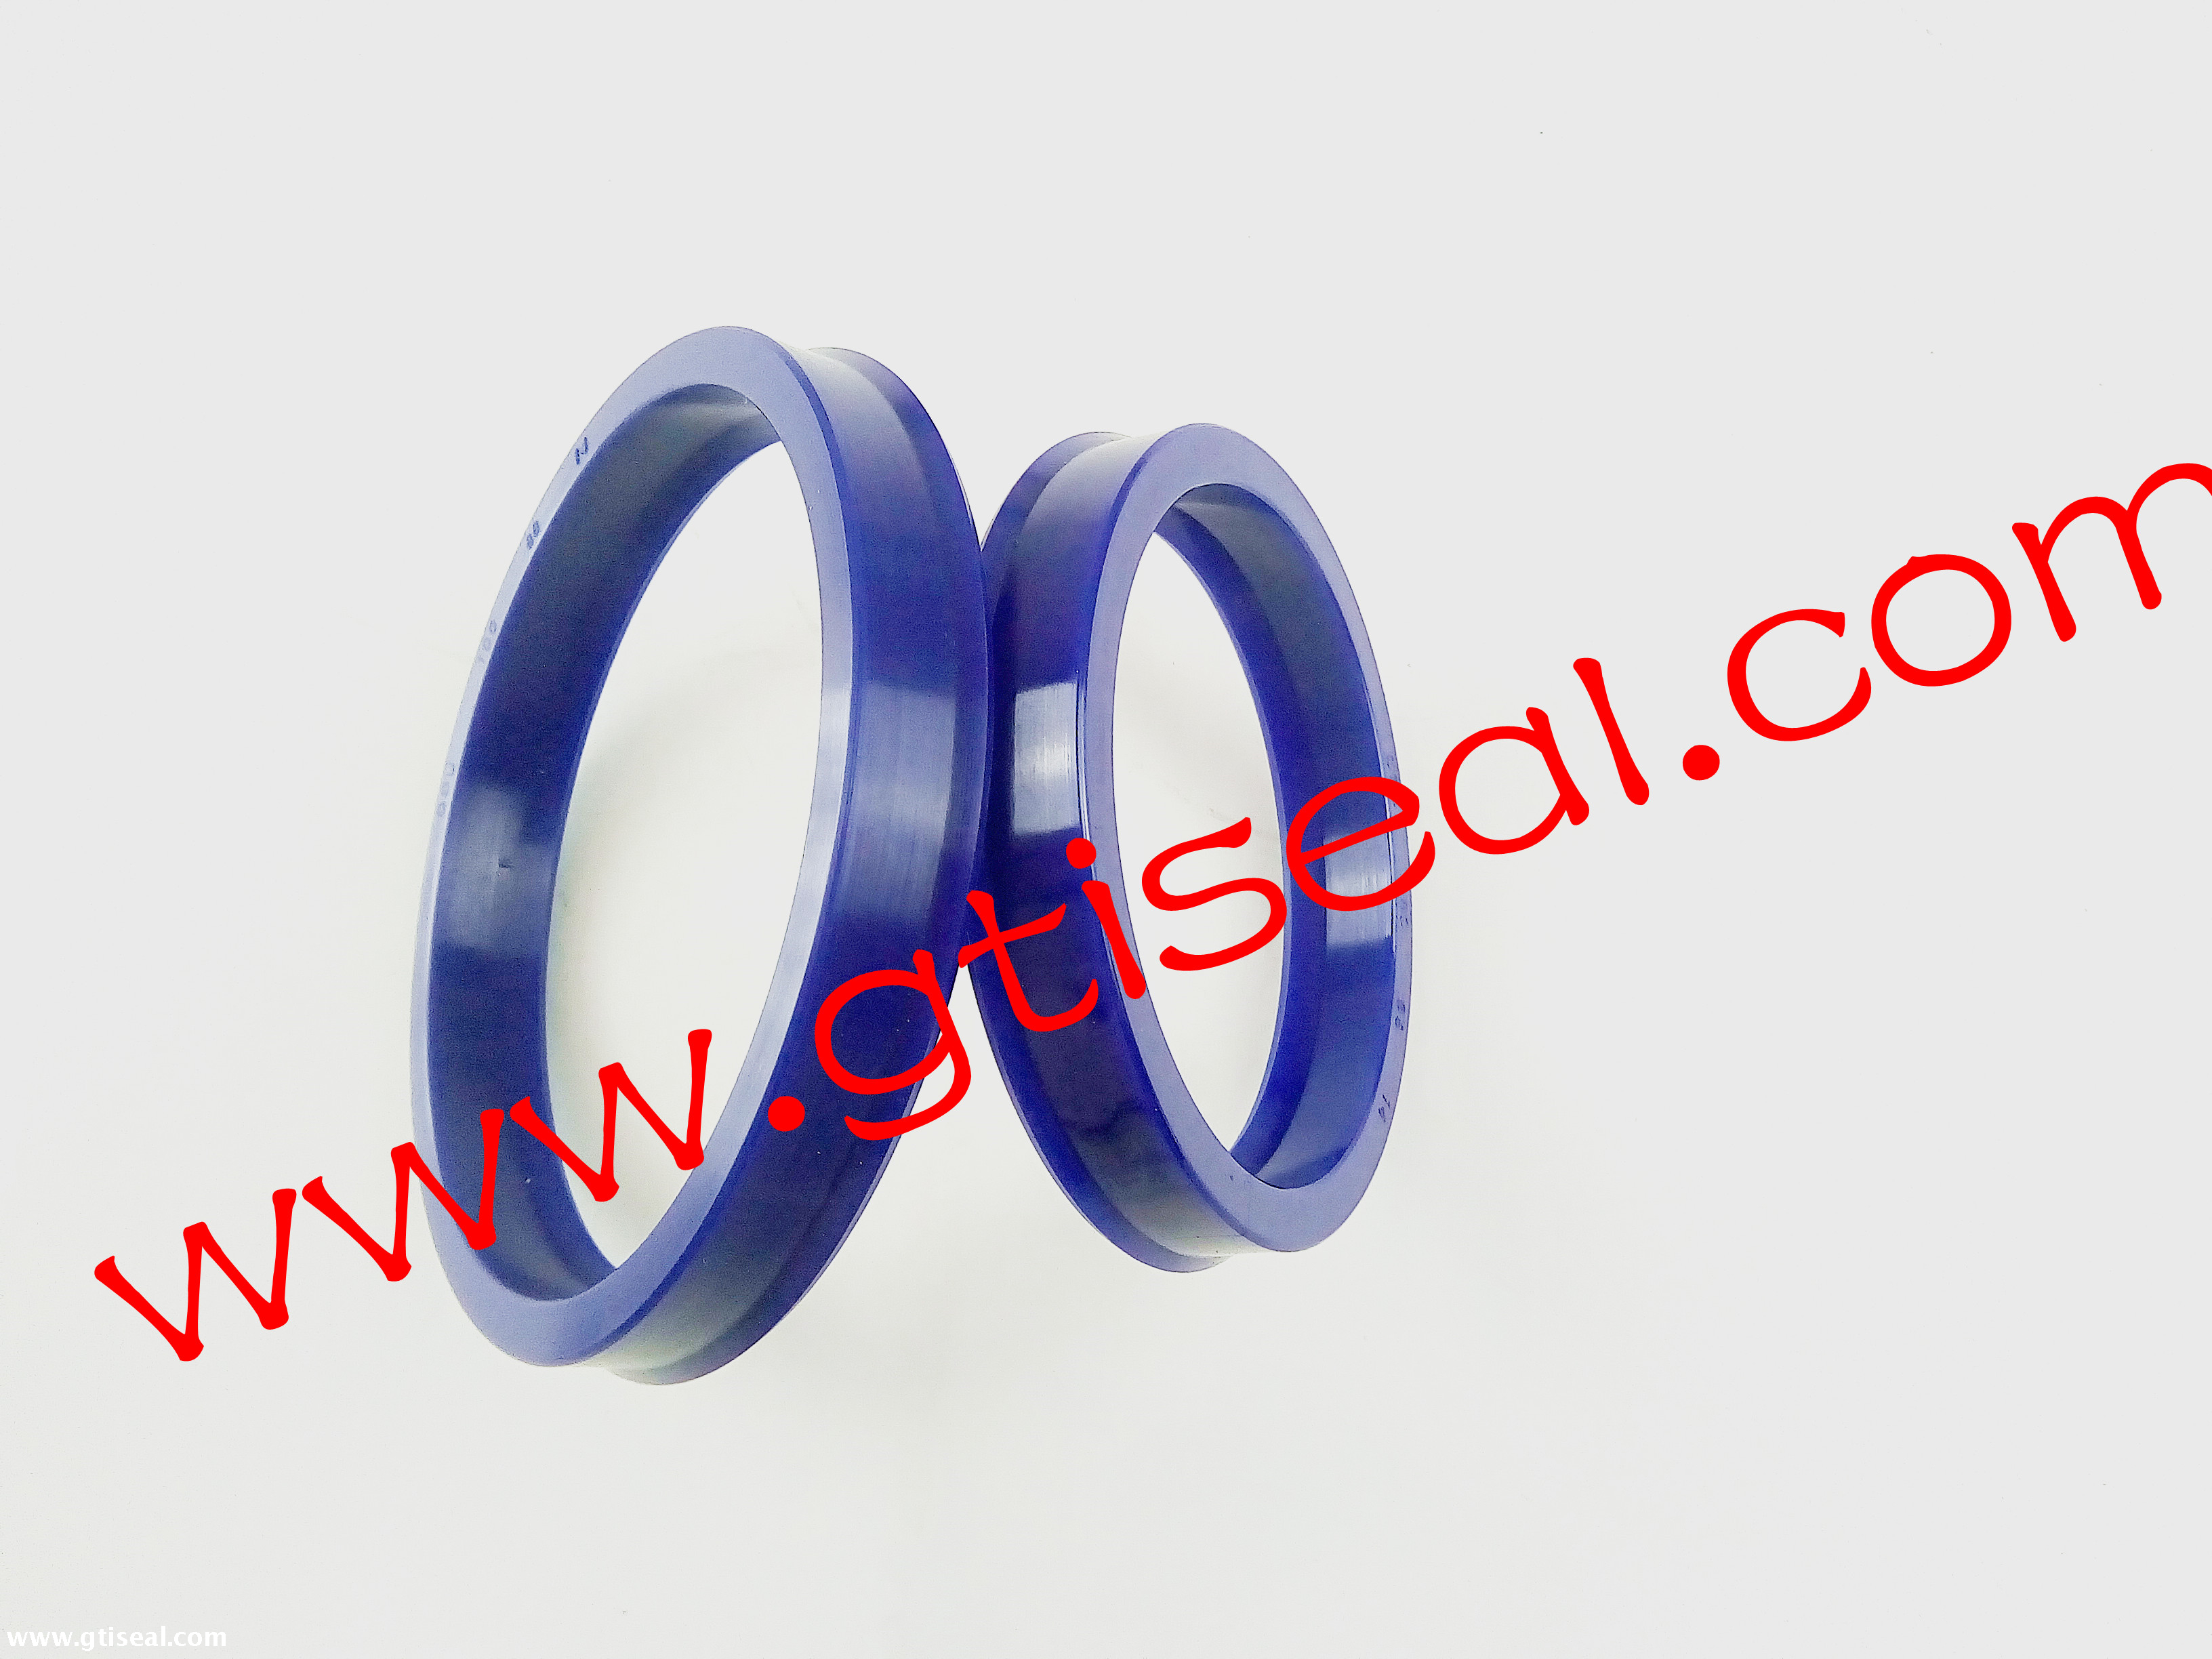 Competitive Wholesale Automotive Car and Industrial Dual Lips Form Rubber TG Plastics Oil Seal 